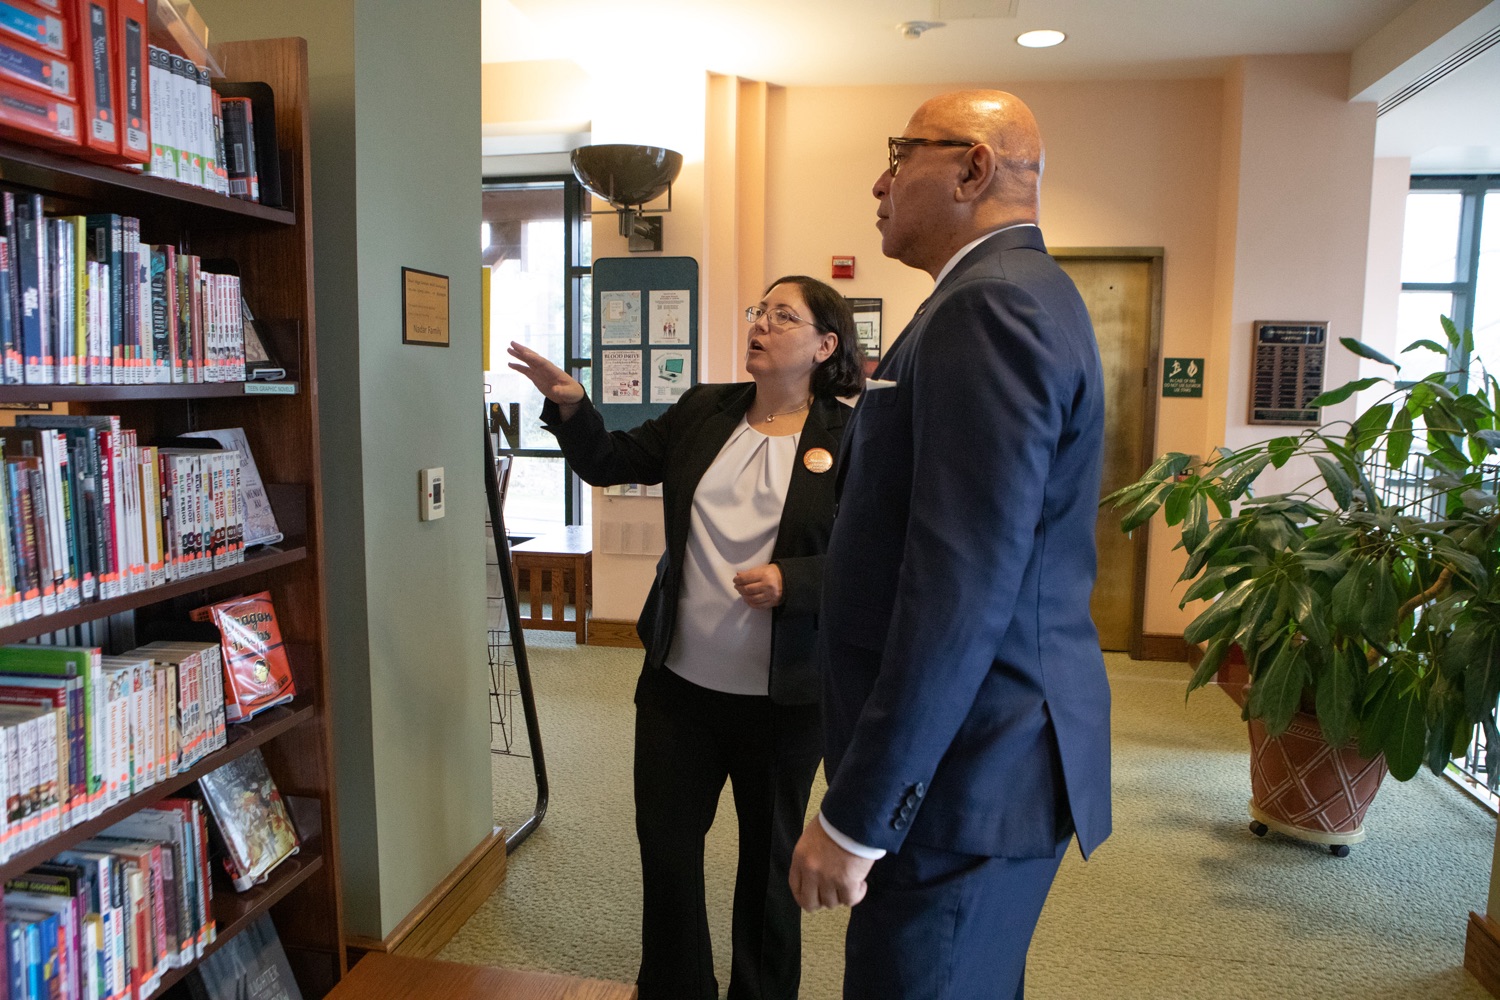 Auditor General Timothy L. DeFoor gets a tour of the Cleve J. Fredricksen Library from Jessica Miller, Director, Cleve J. Fredricksen Library...Auditor General Timothy L. DeFoor visited the Cleve J. Fredricksen Library to promote the Pennsylvania Library Associations (PaLA) PA Forward® Initiative, which fuels the types of knowledge essential to helping Pennsylvanians succeed. The initiative focuses on five literacy hubs: Basic Literacy; Information Literacy; Civic and Social Literacy; Health Literacy; and Financial Literacy. ..Pennsylvania libraries offer more than just booksthey are a central knowledge hub where you can access a multitude of resources for free, Auditor General DeFoor said. One of the biggest benefits to having a library card is that it gives you access to information about money and will help you on your road to becoming financially literate. Financial literacy is vital to Pennsylvanias growth, and Im excited to continue working with the Pennsylvania Library Association to ensure all Pennsylvanians know how to be money smart.<br><a href="https://filesource.amperwave.net/commonwealthofpa/photo/24355_AudGen_FinancialLiteracy_ERD_038.jpg" target="_blank">⇣ Download Photo</a>